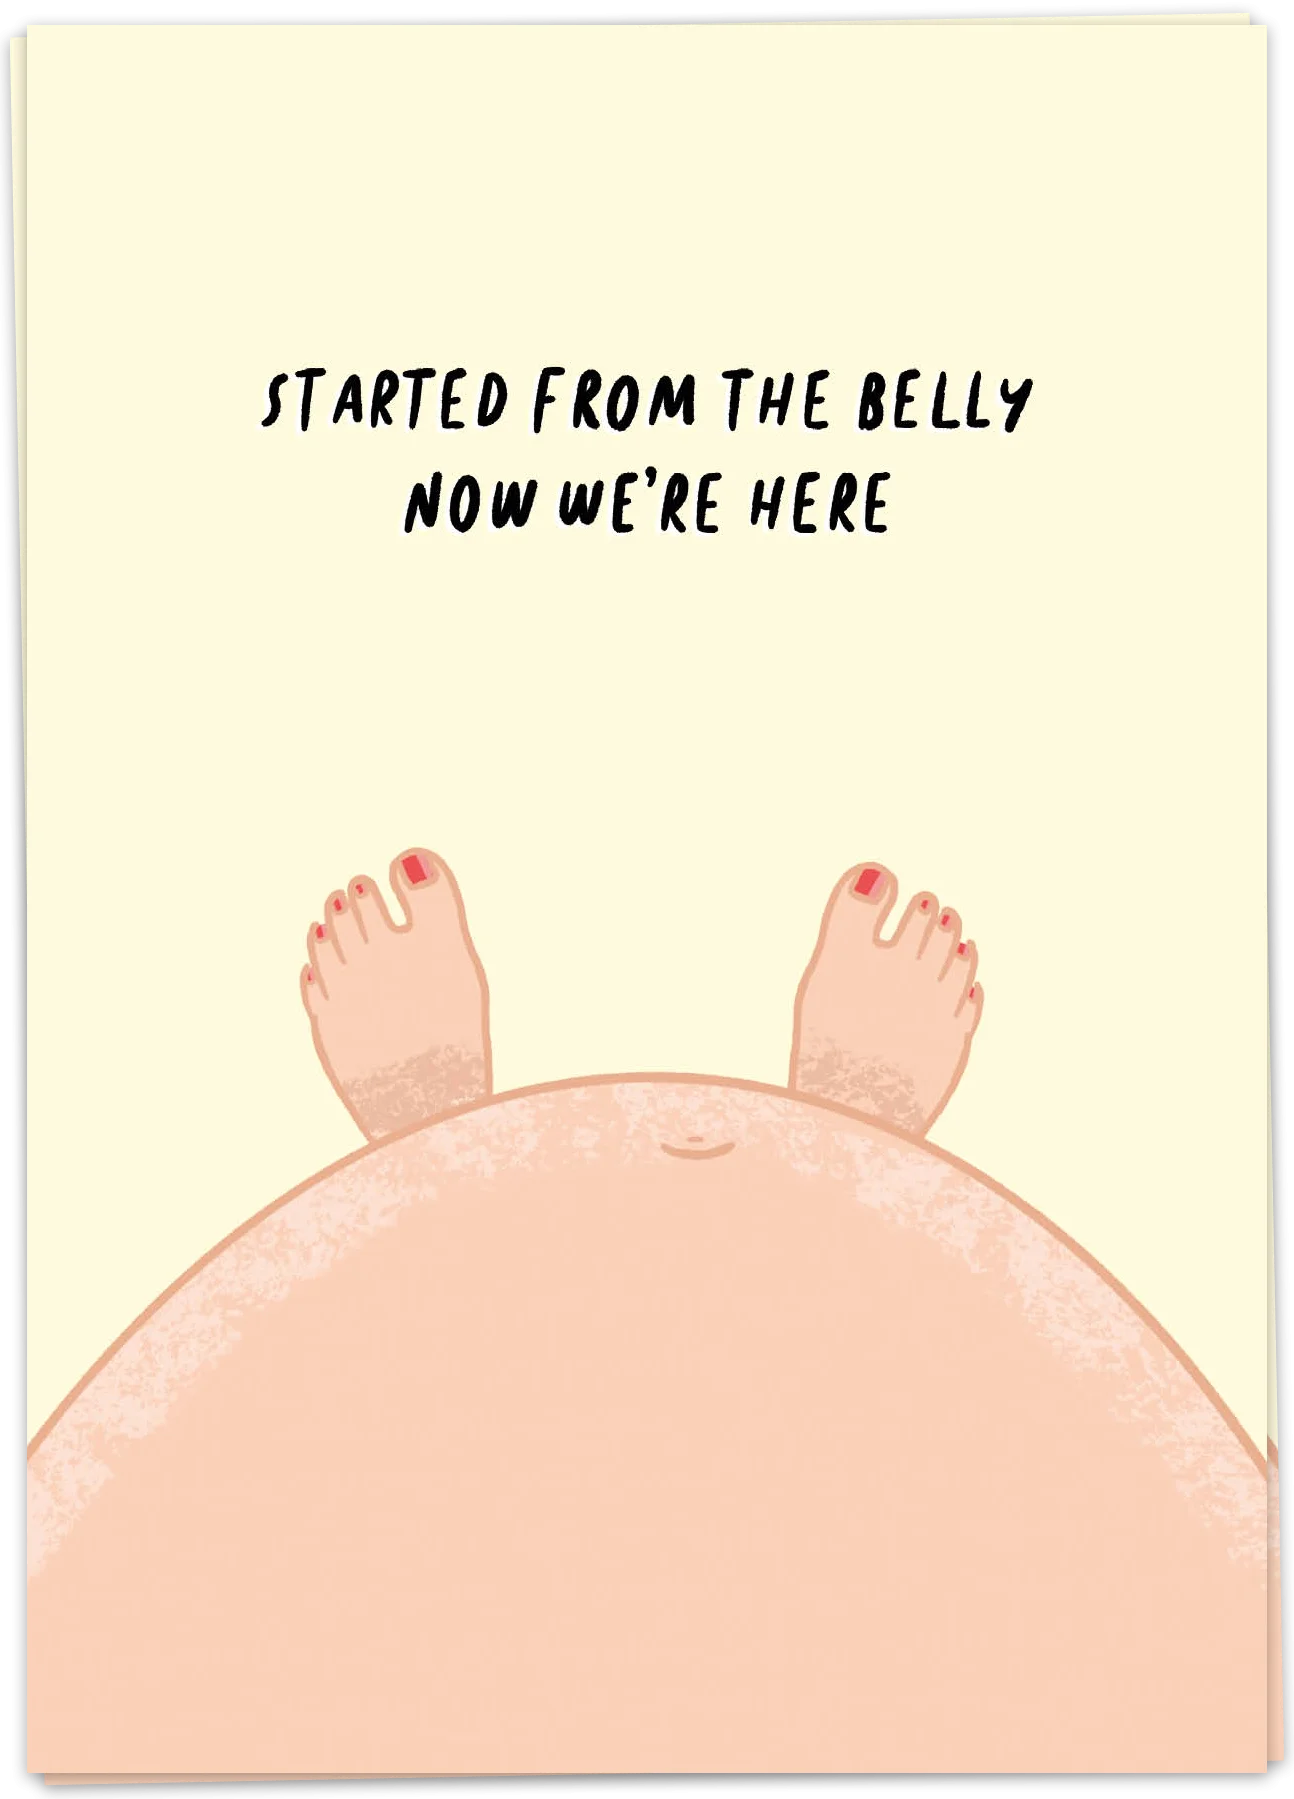 Started from the belly